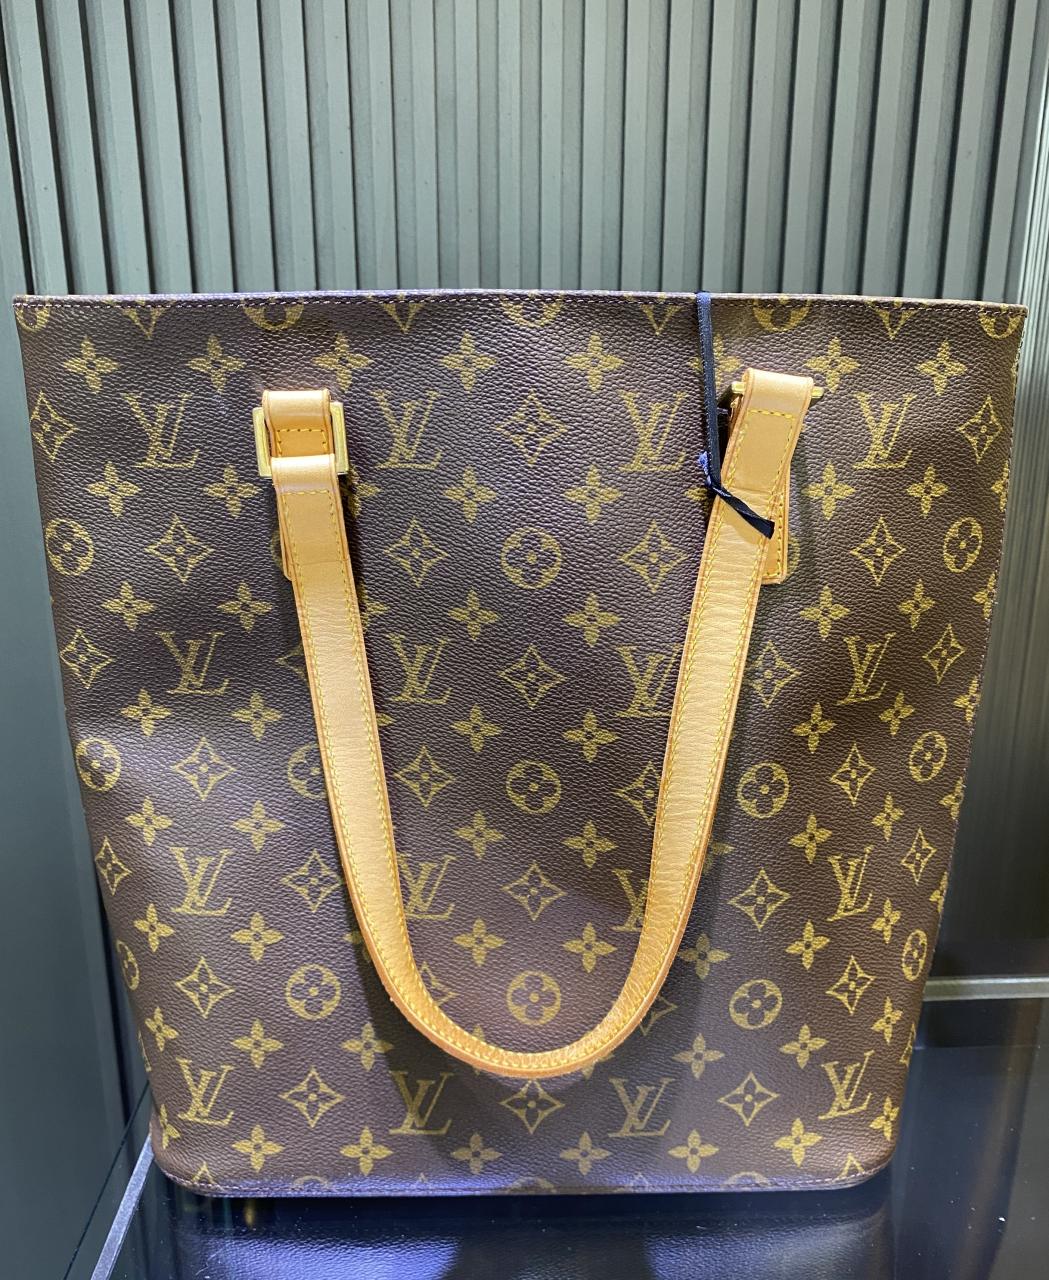 Pre-Owned Louis Vuitton 2011 Monogram Vernis Red Patent Leather